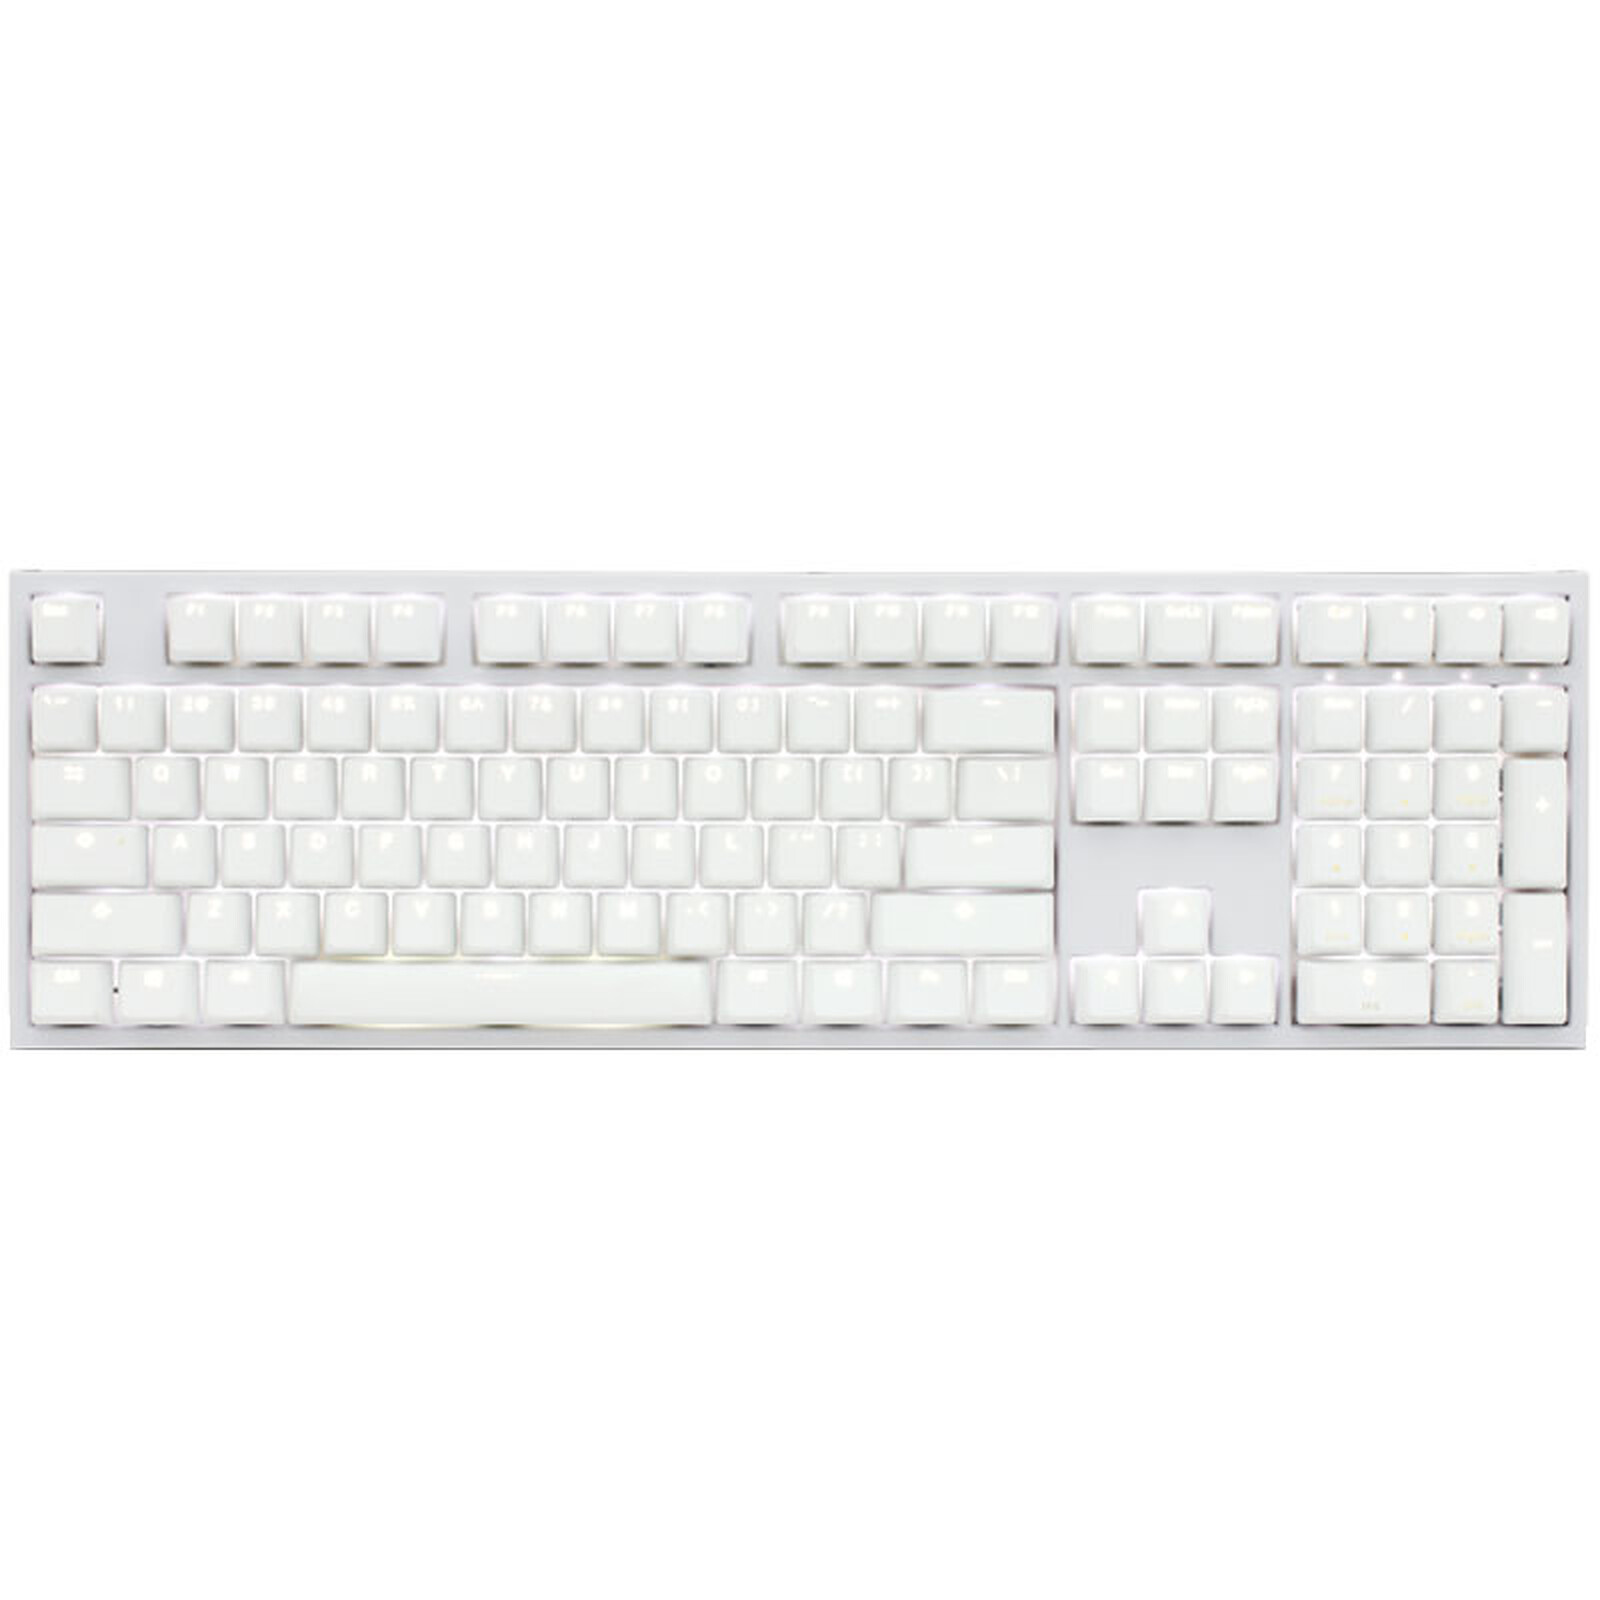 Ducky Channel One 2 Backlit (coloris blanc - Cherry MX Speed Silver - LEDs blanches)